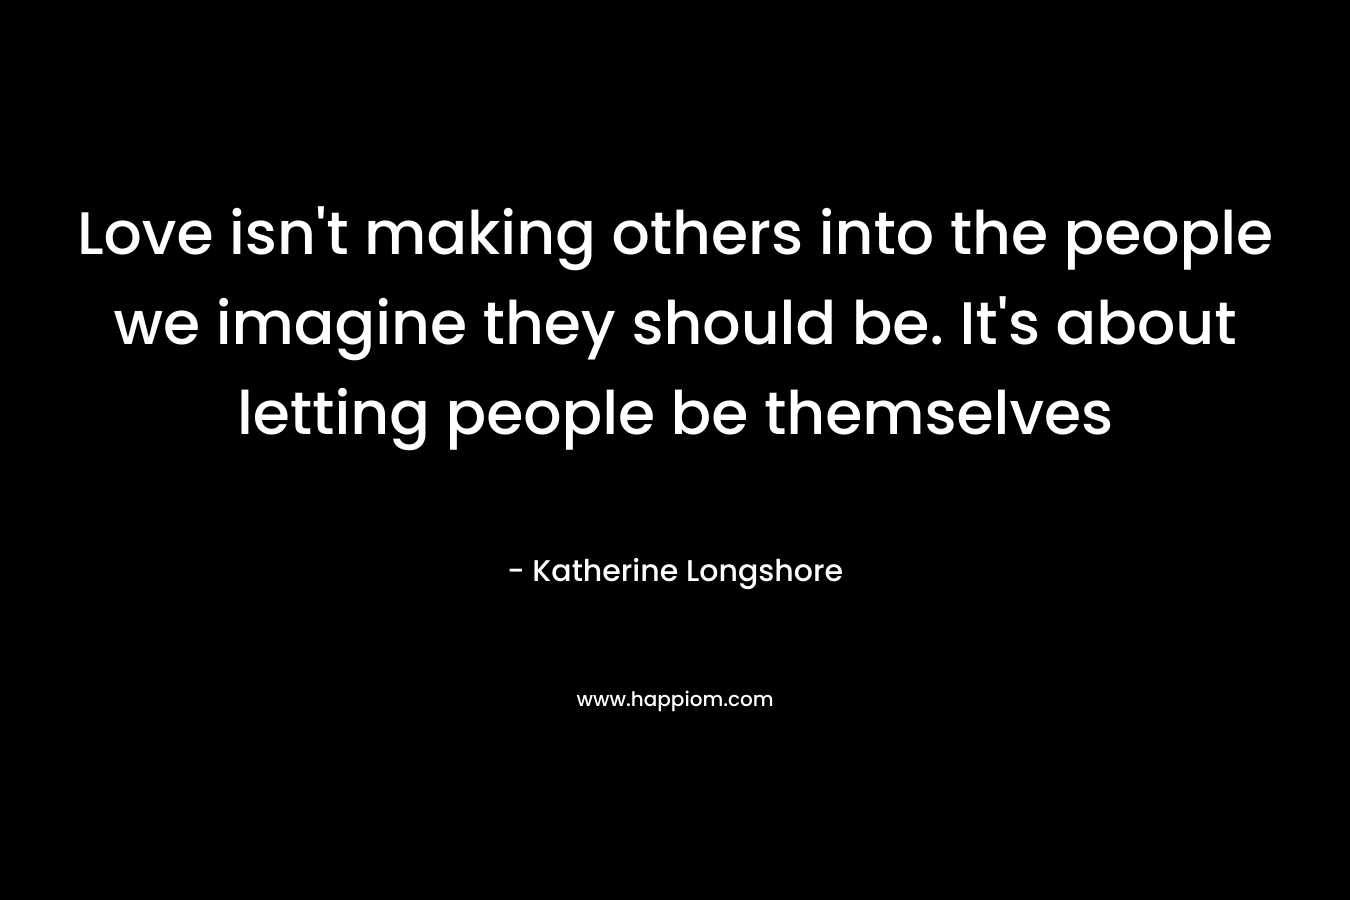 Love isn’t making others into the people we imagine they should be. It’s about letting people be themselves – Katherine Longshore